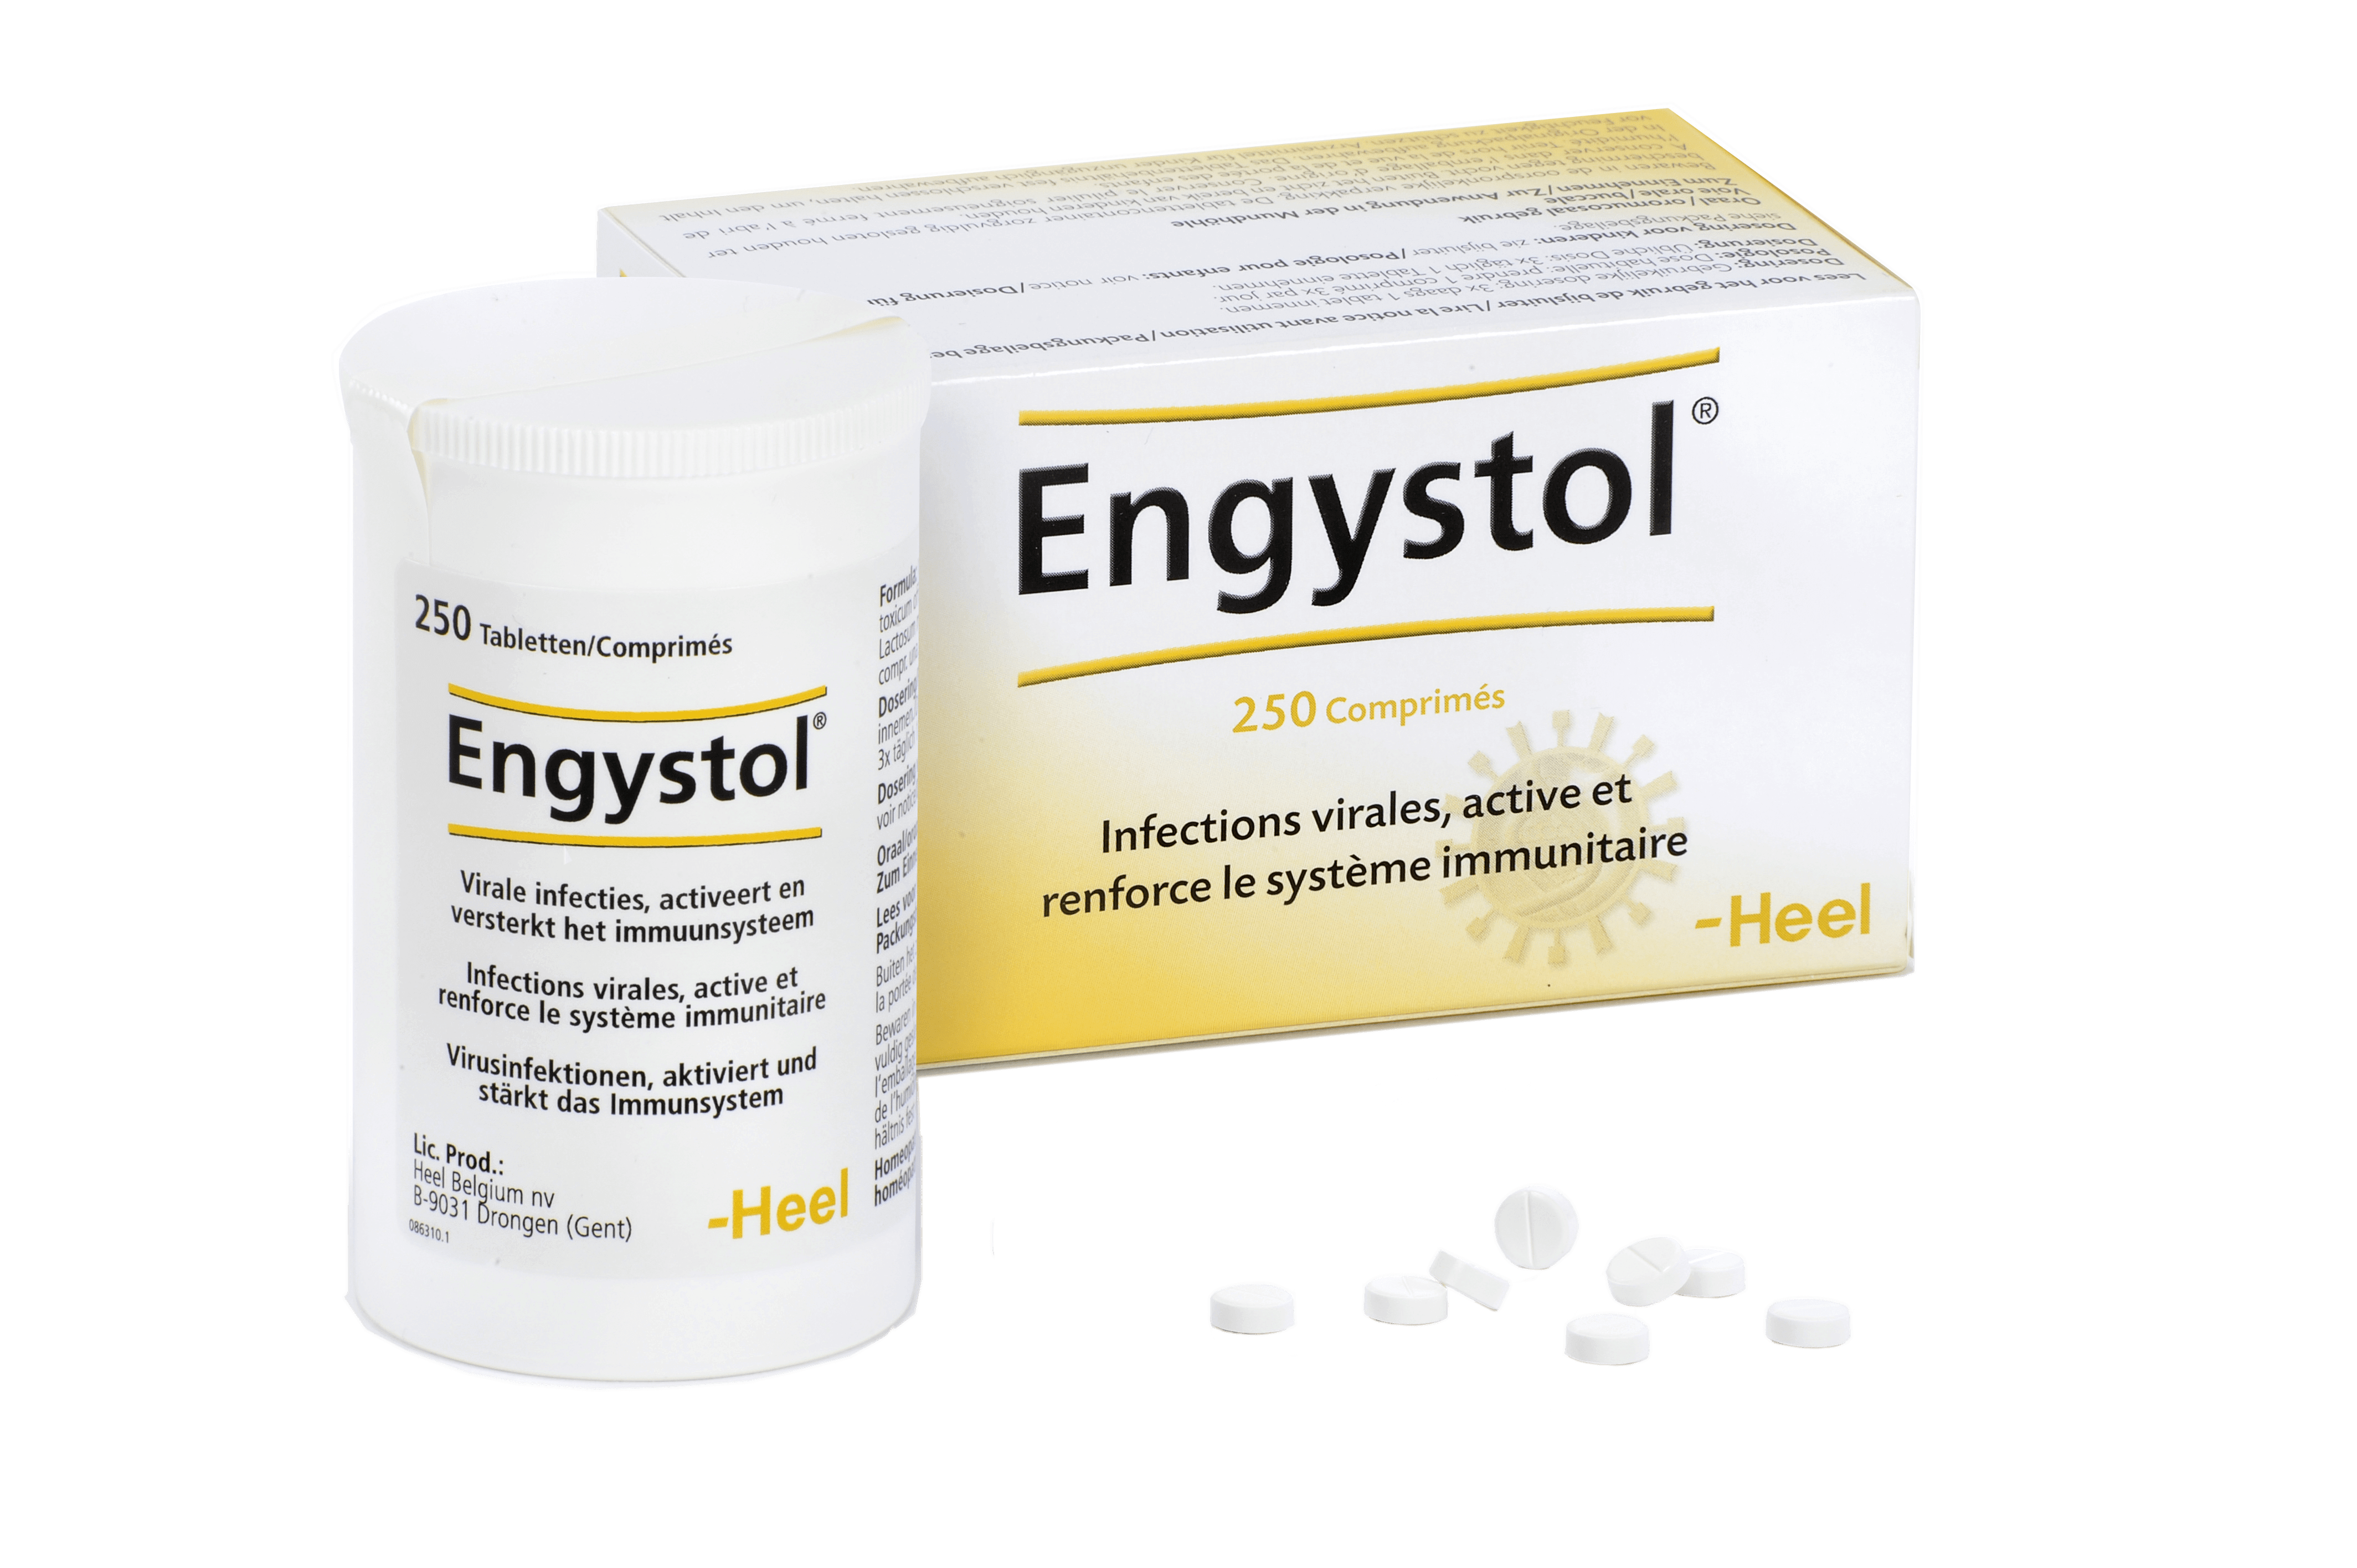 Engystol emballage